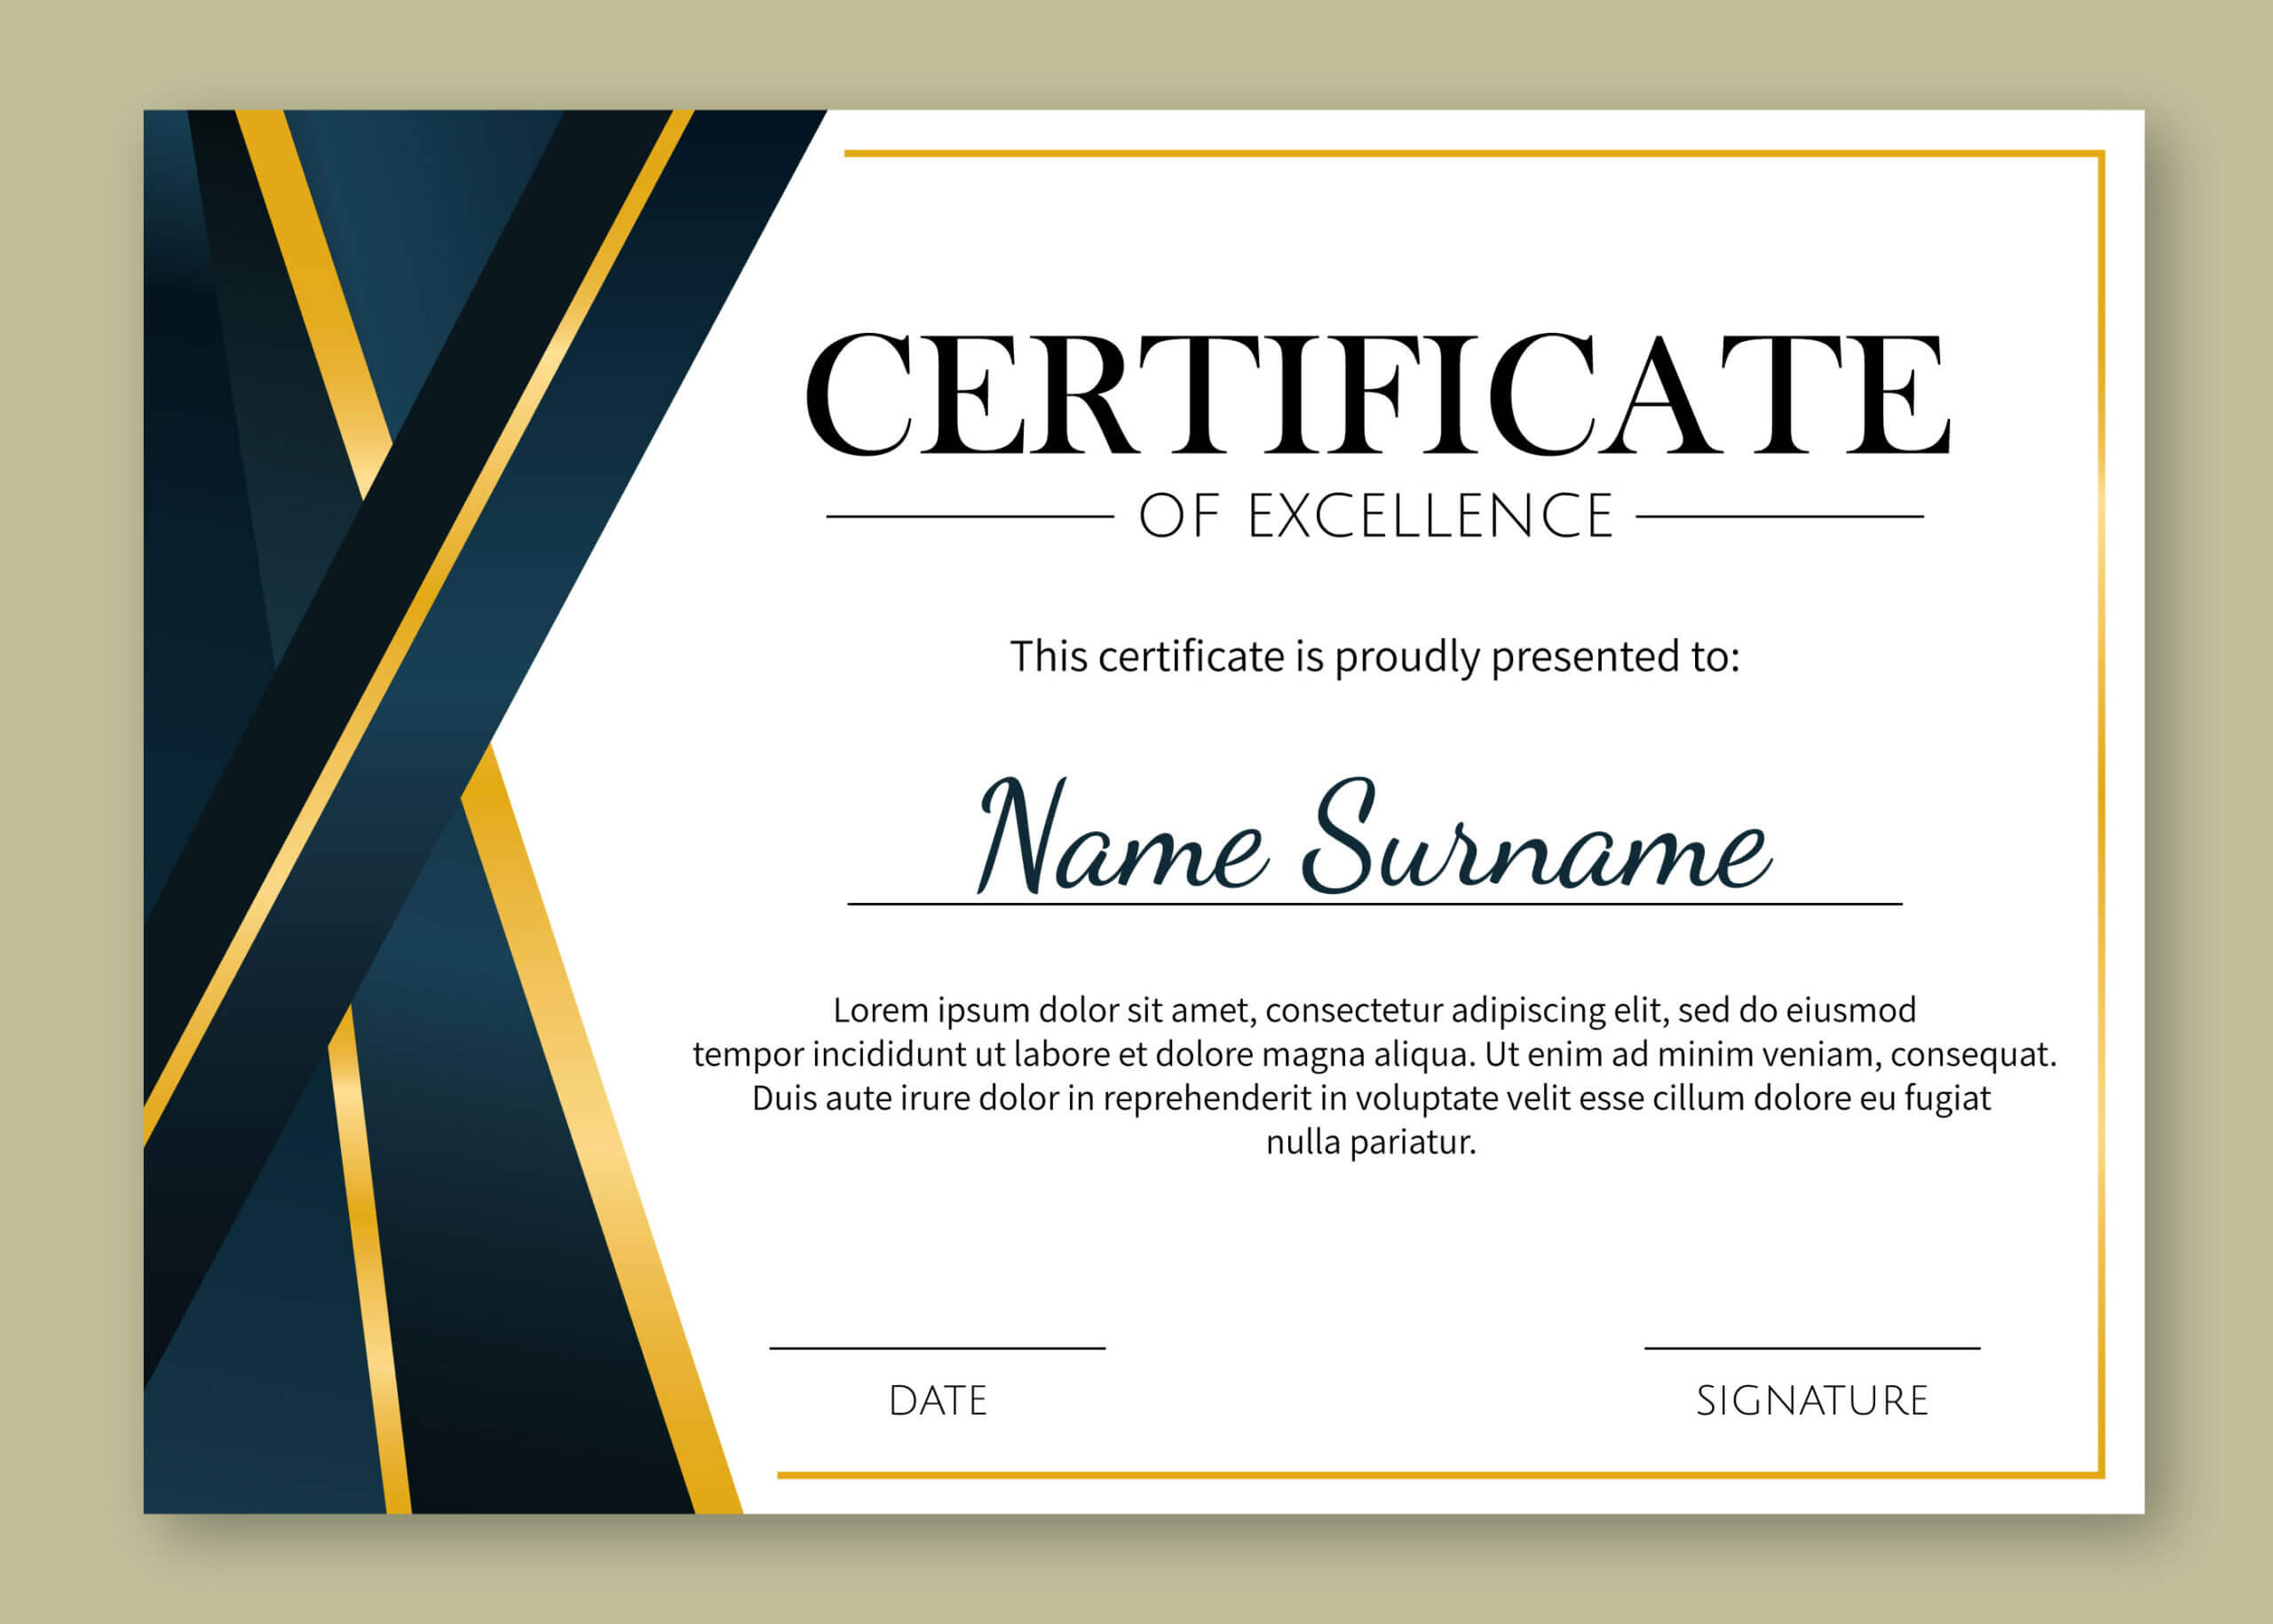 Certificate Of Excellence Template Free Download Throughout Pages Certificate Templates